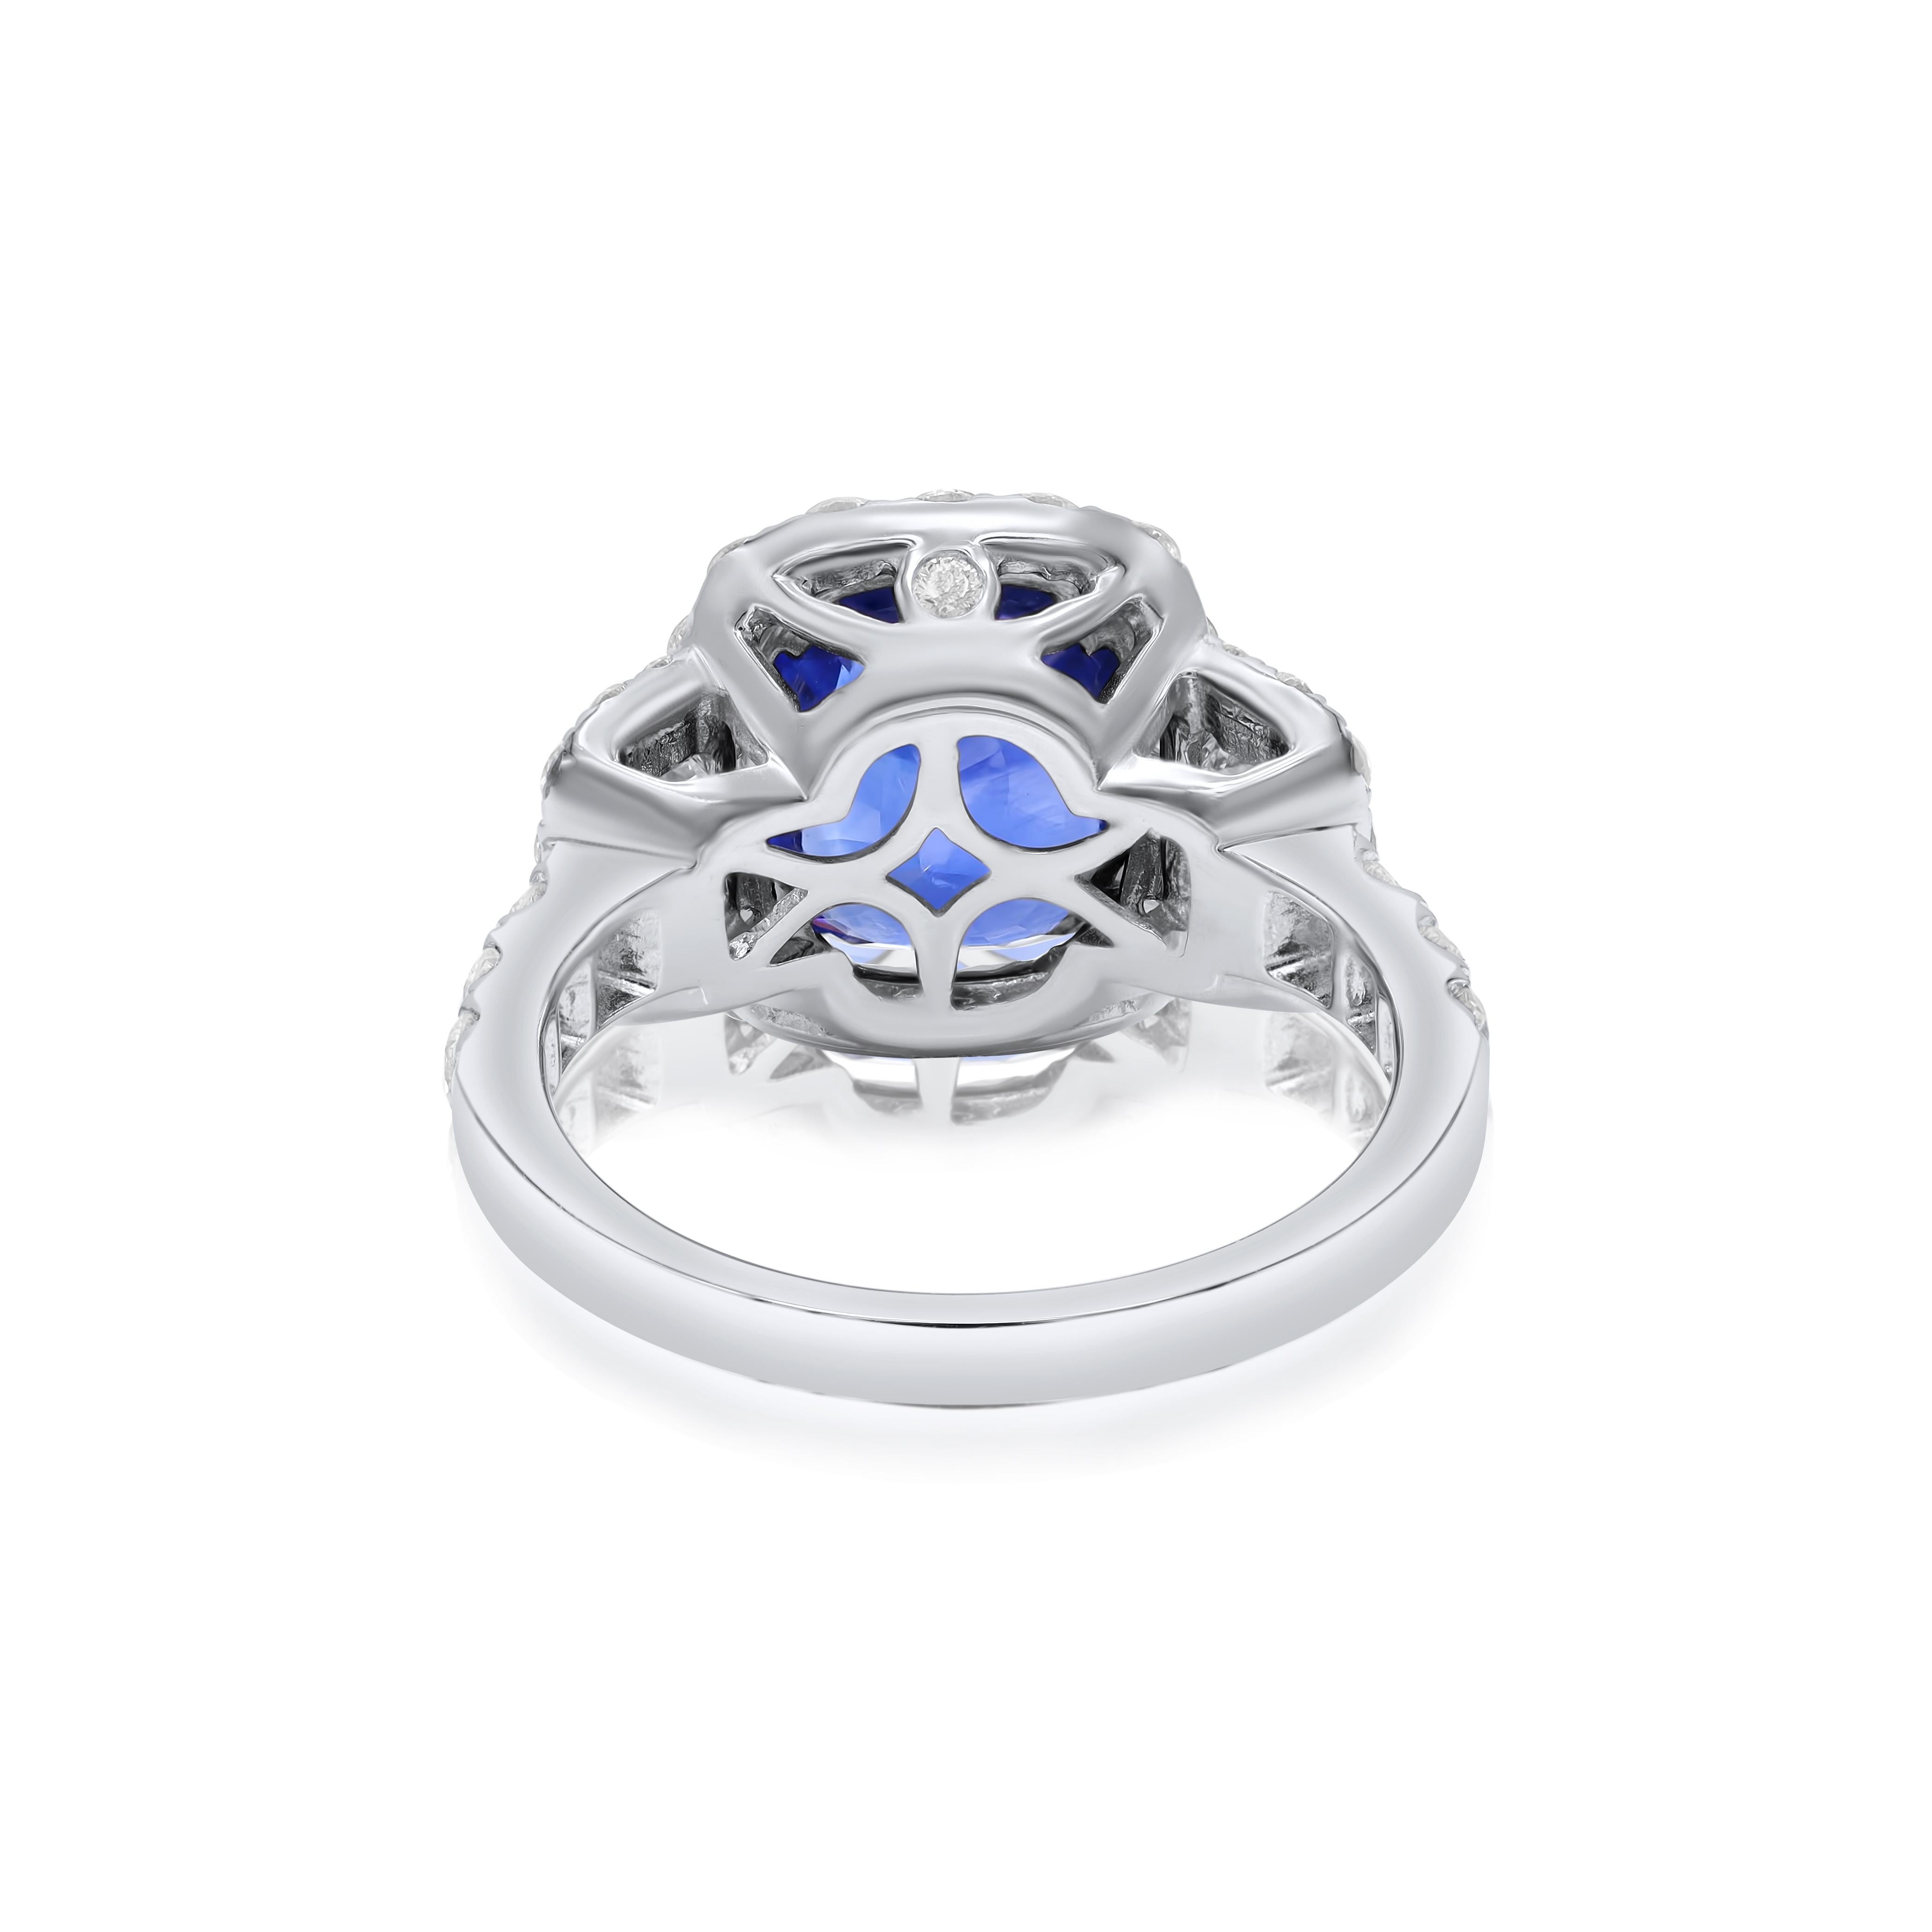 Modern Diana M. 18 kt white gold sapphire diamond ring featuring a 3.58 ct  For Sale